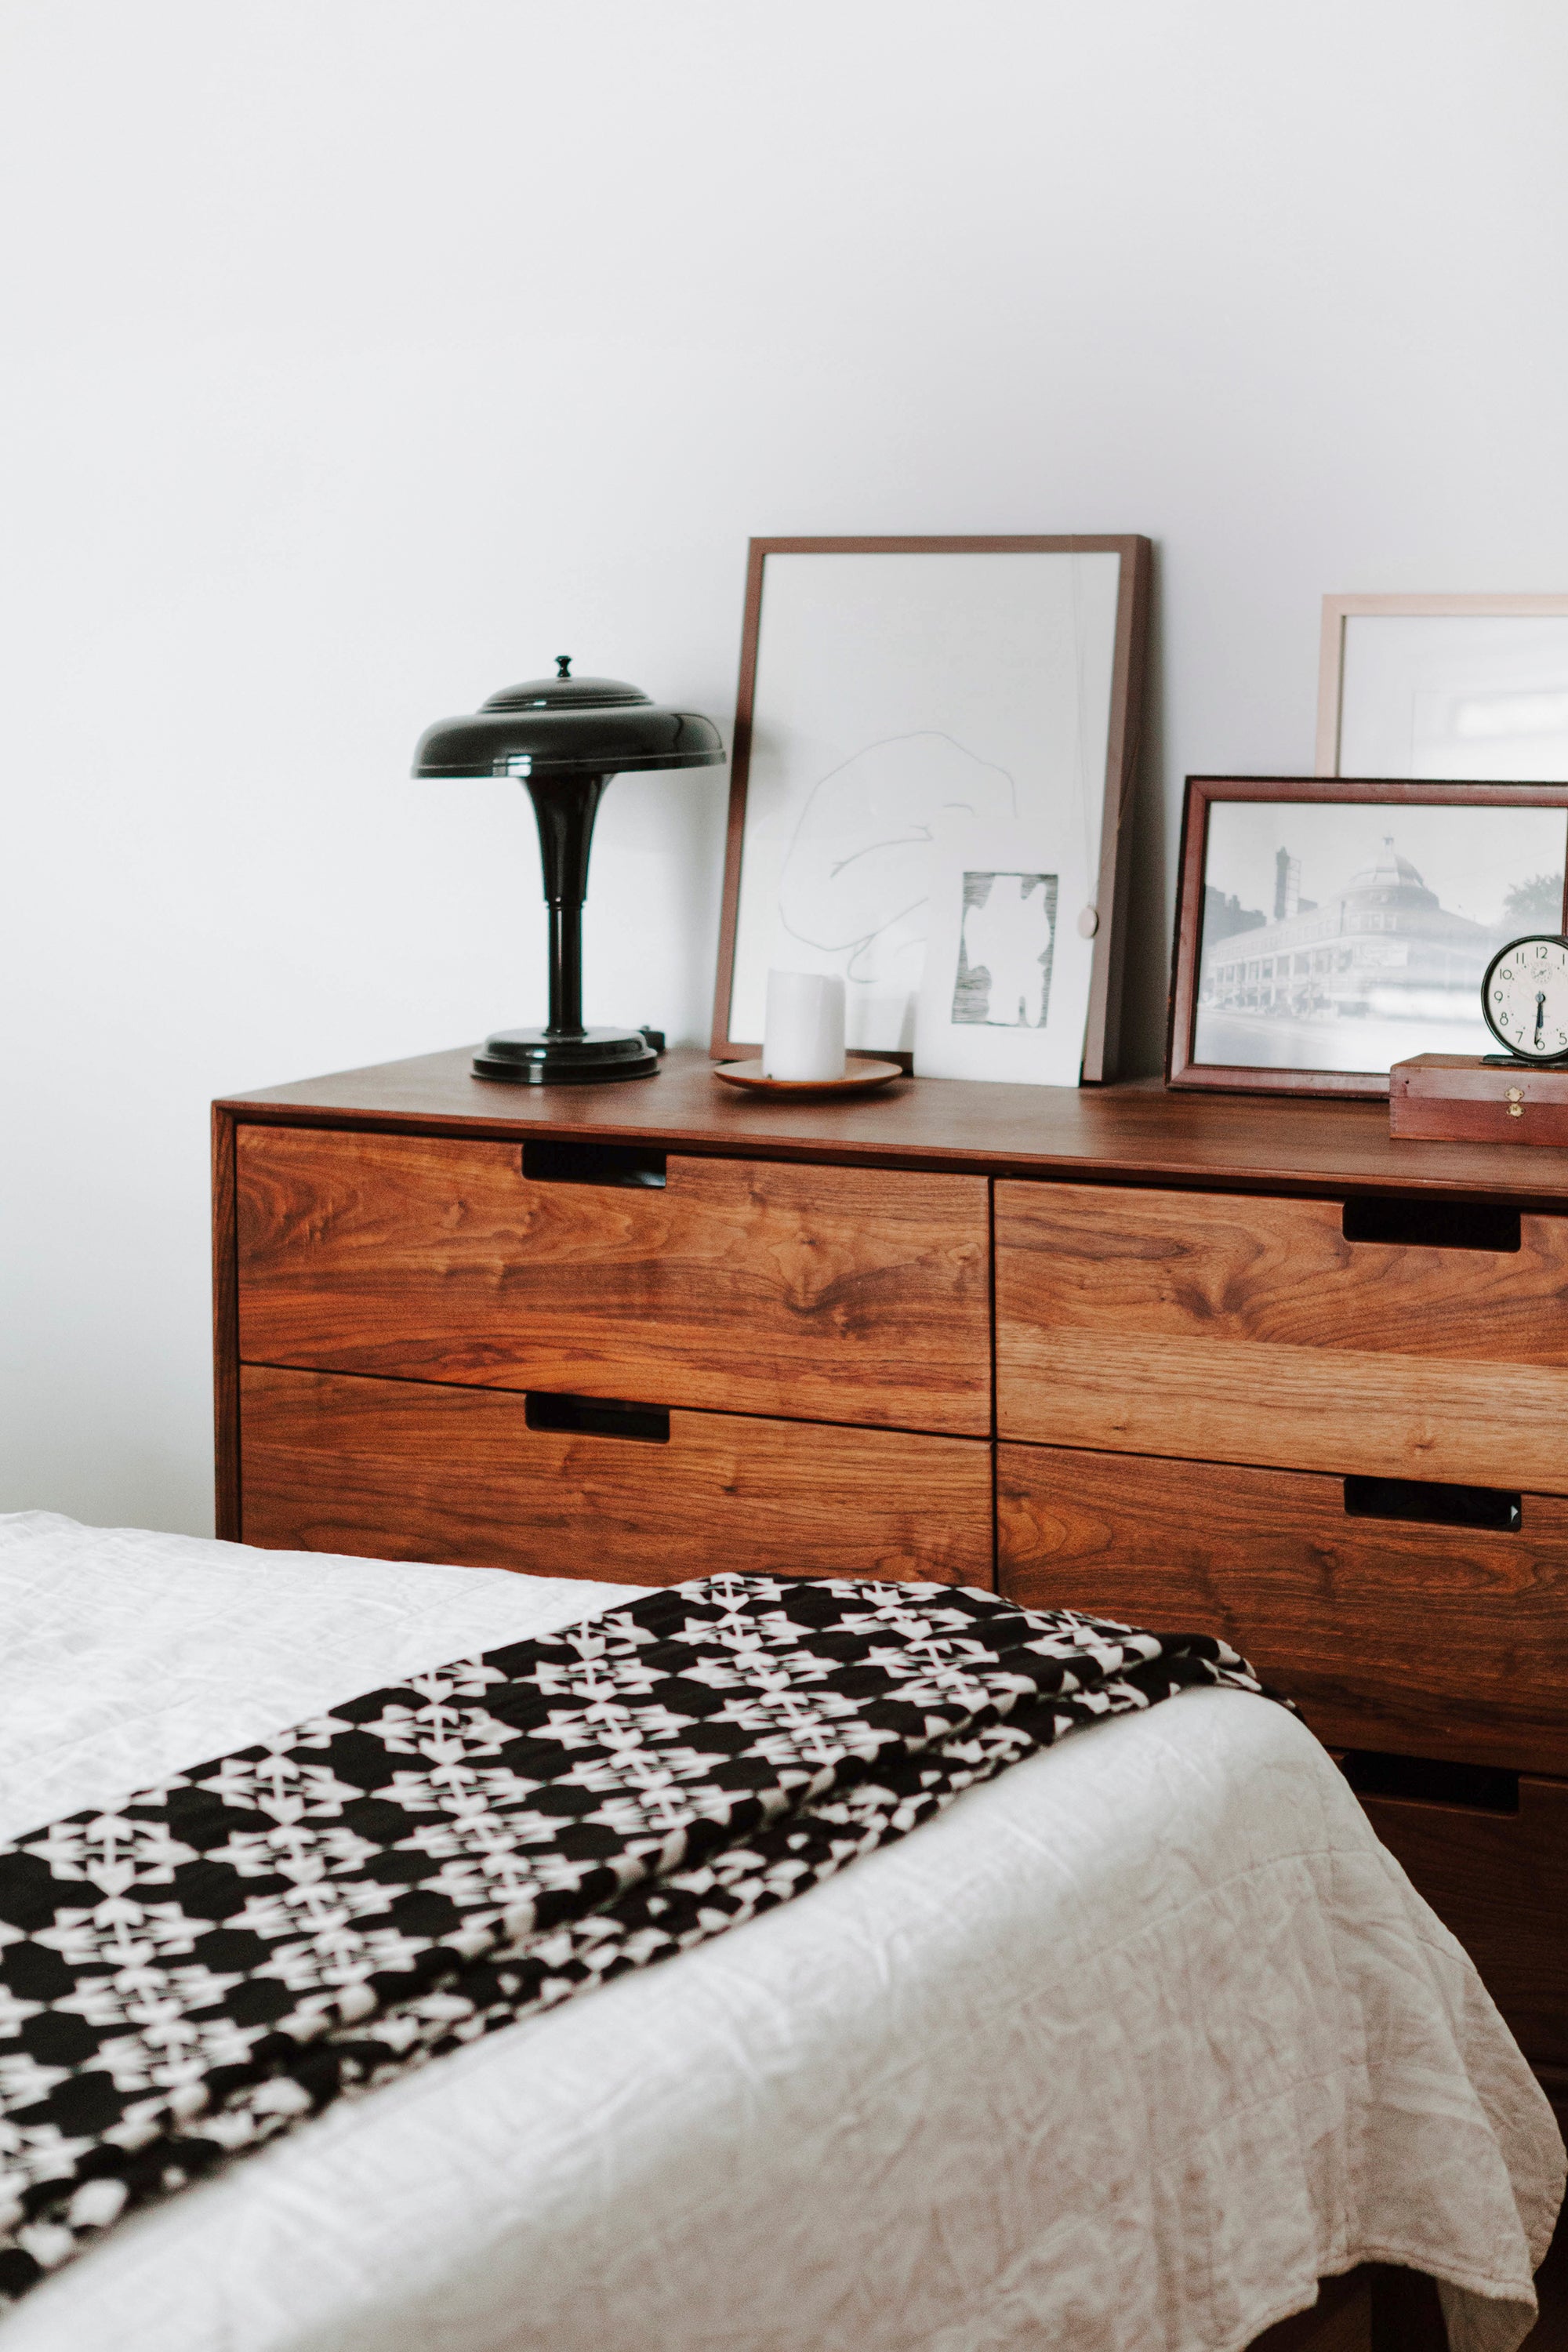 dresser with a lamp on it next to a bed with white sheets